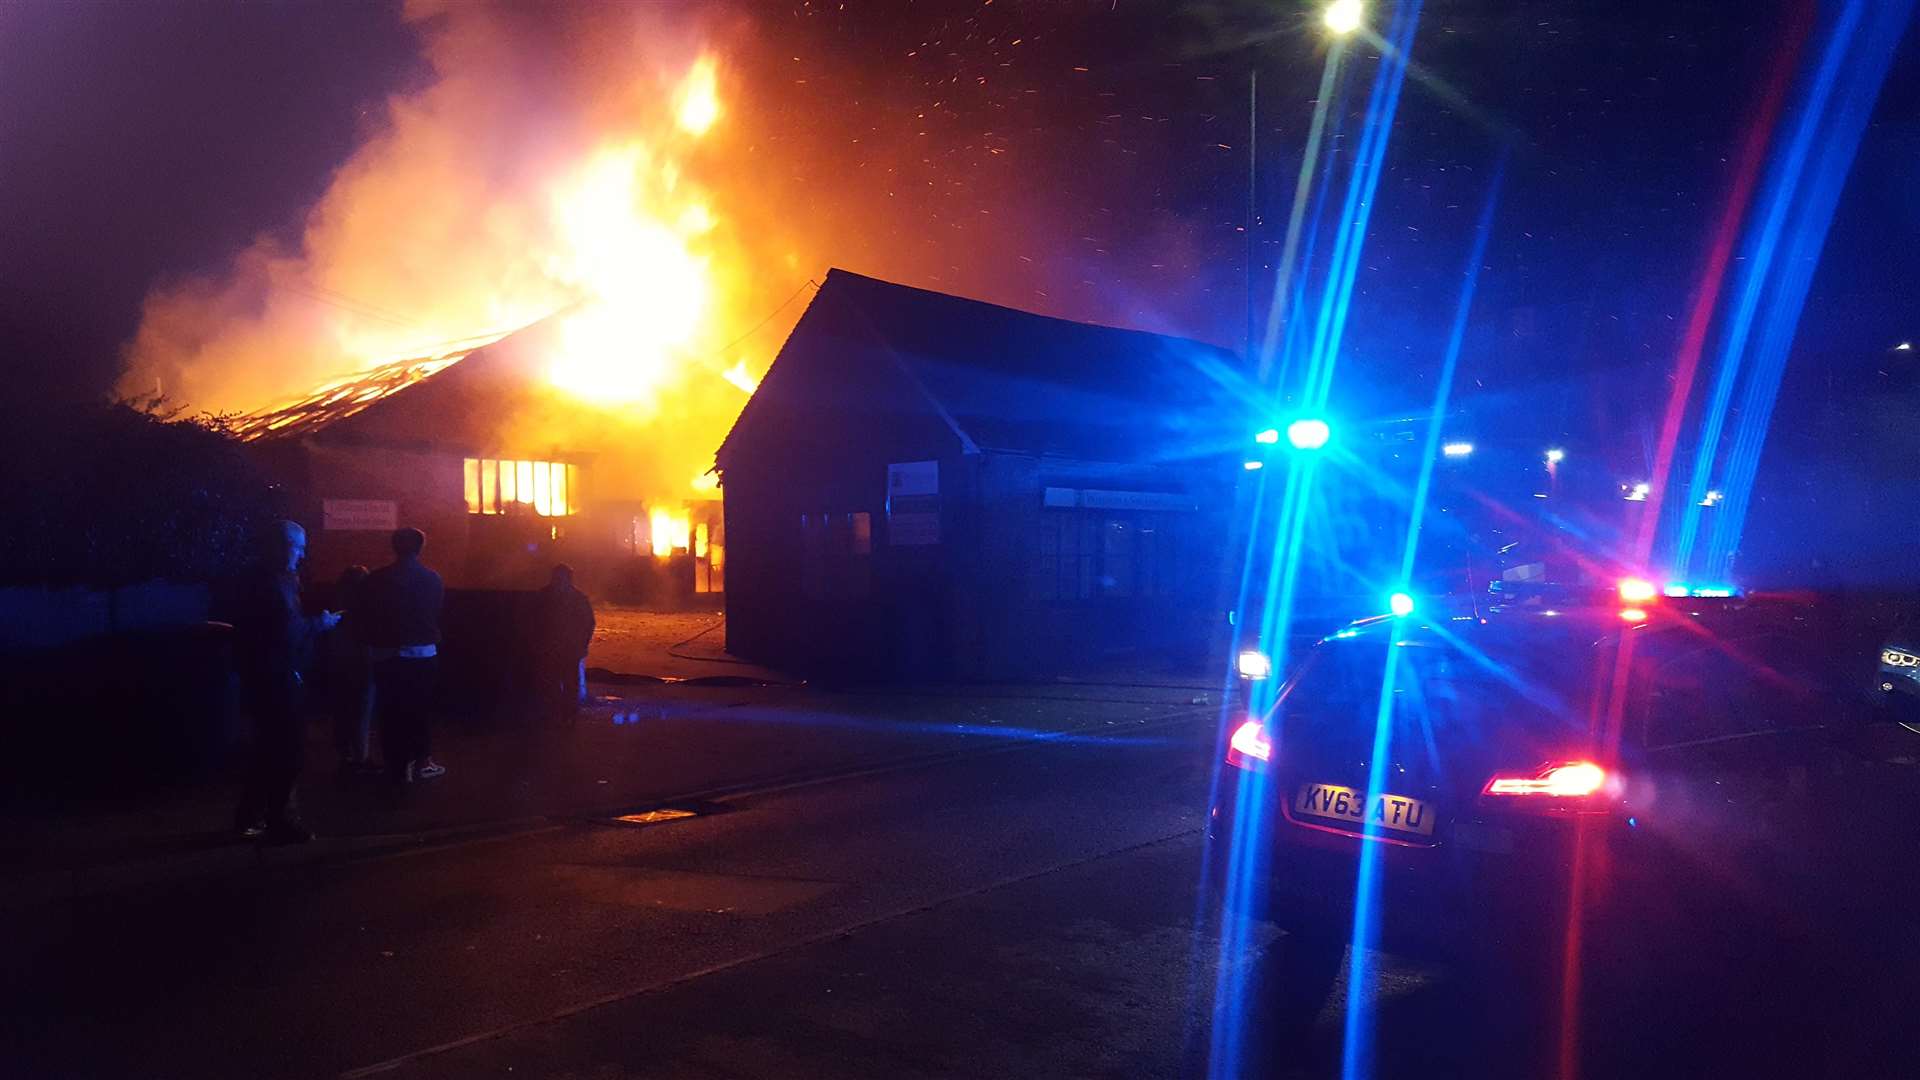 Teynham joinery workshop FJ Williams at the height of the blaze. Picture: Olly Gibson